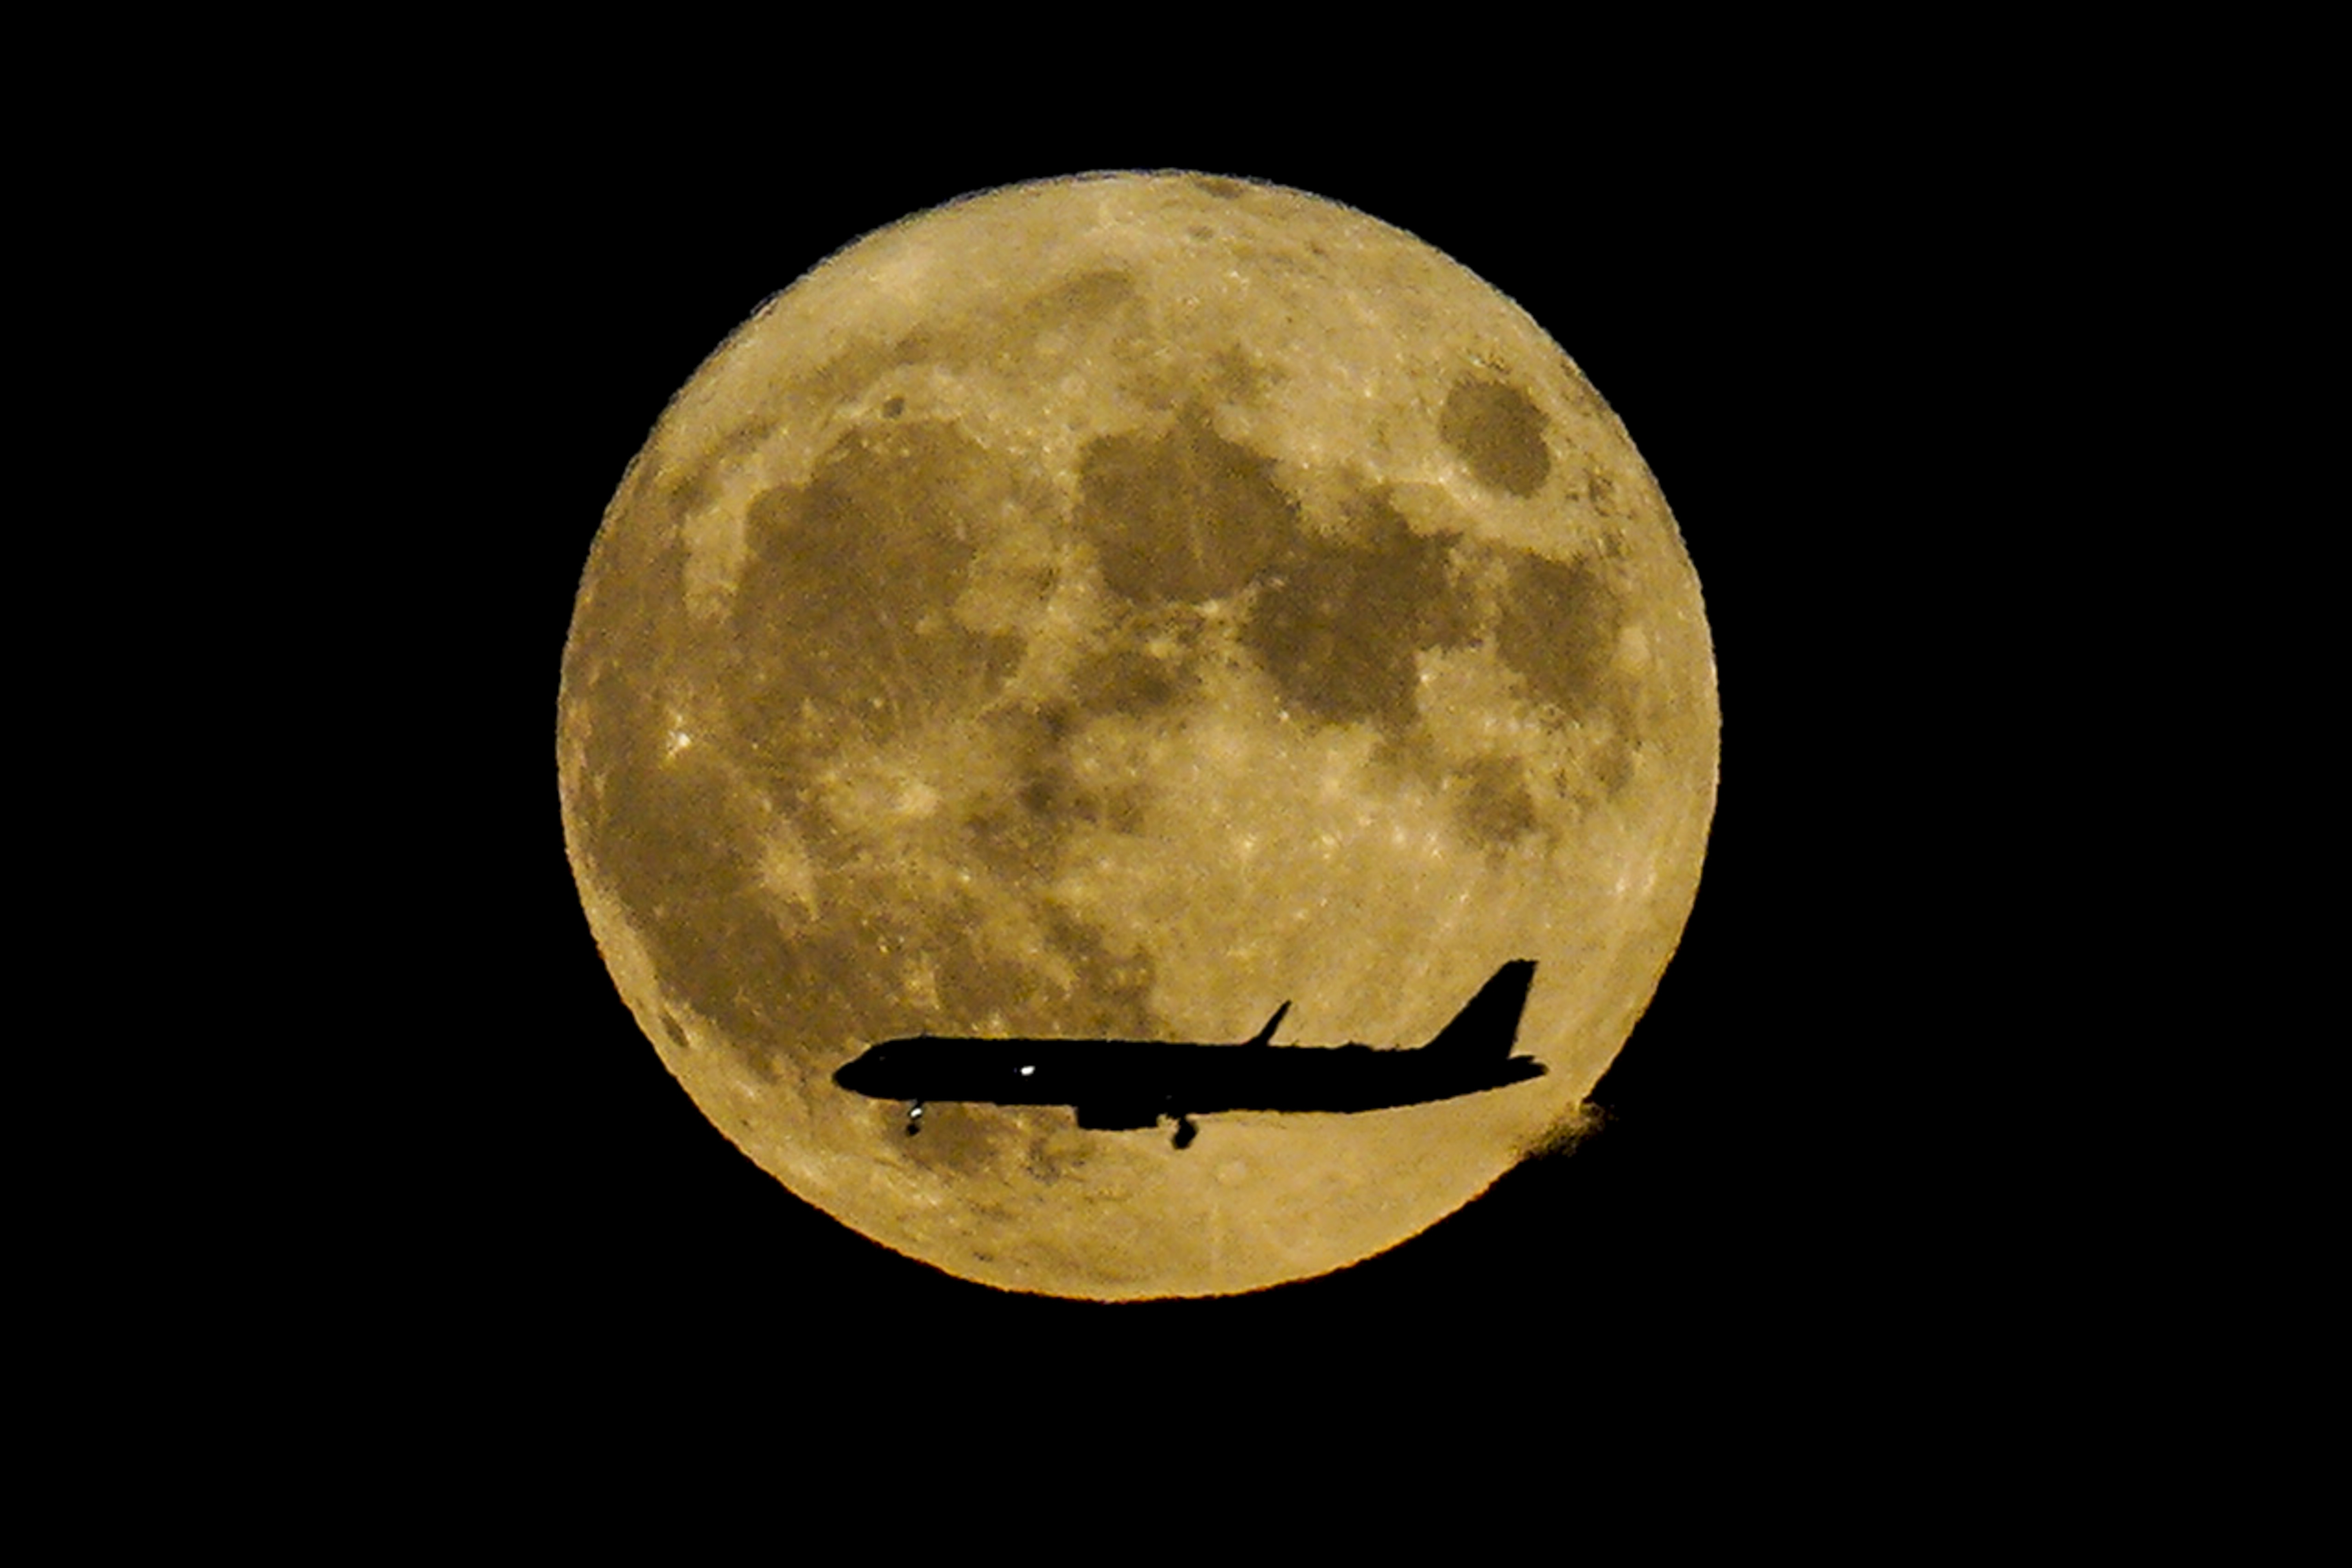 Supermoon puts on a dazzling display across the world